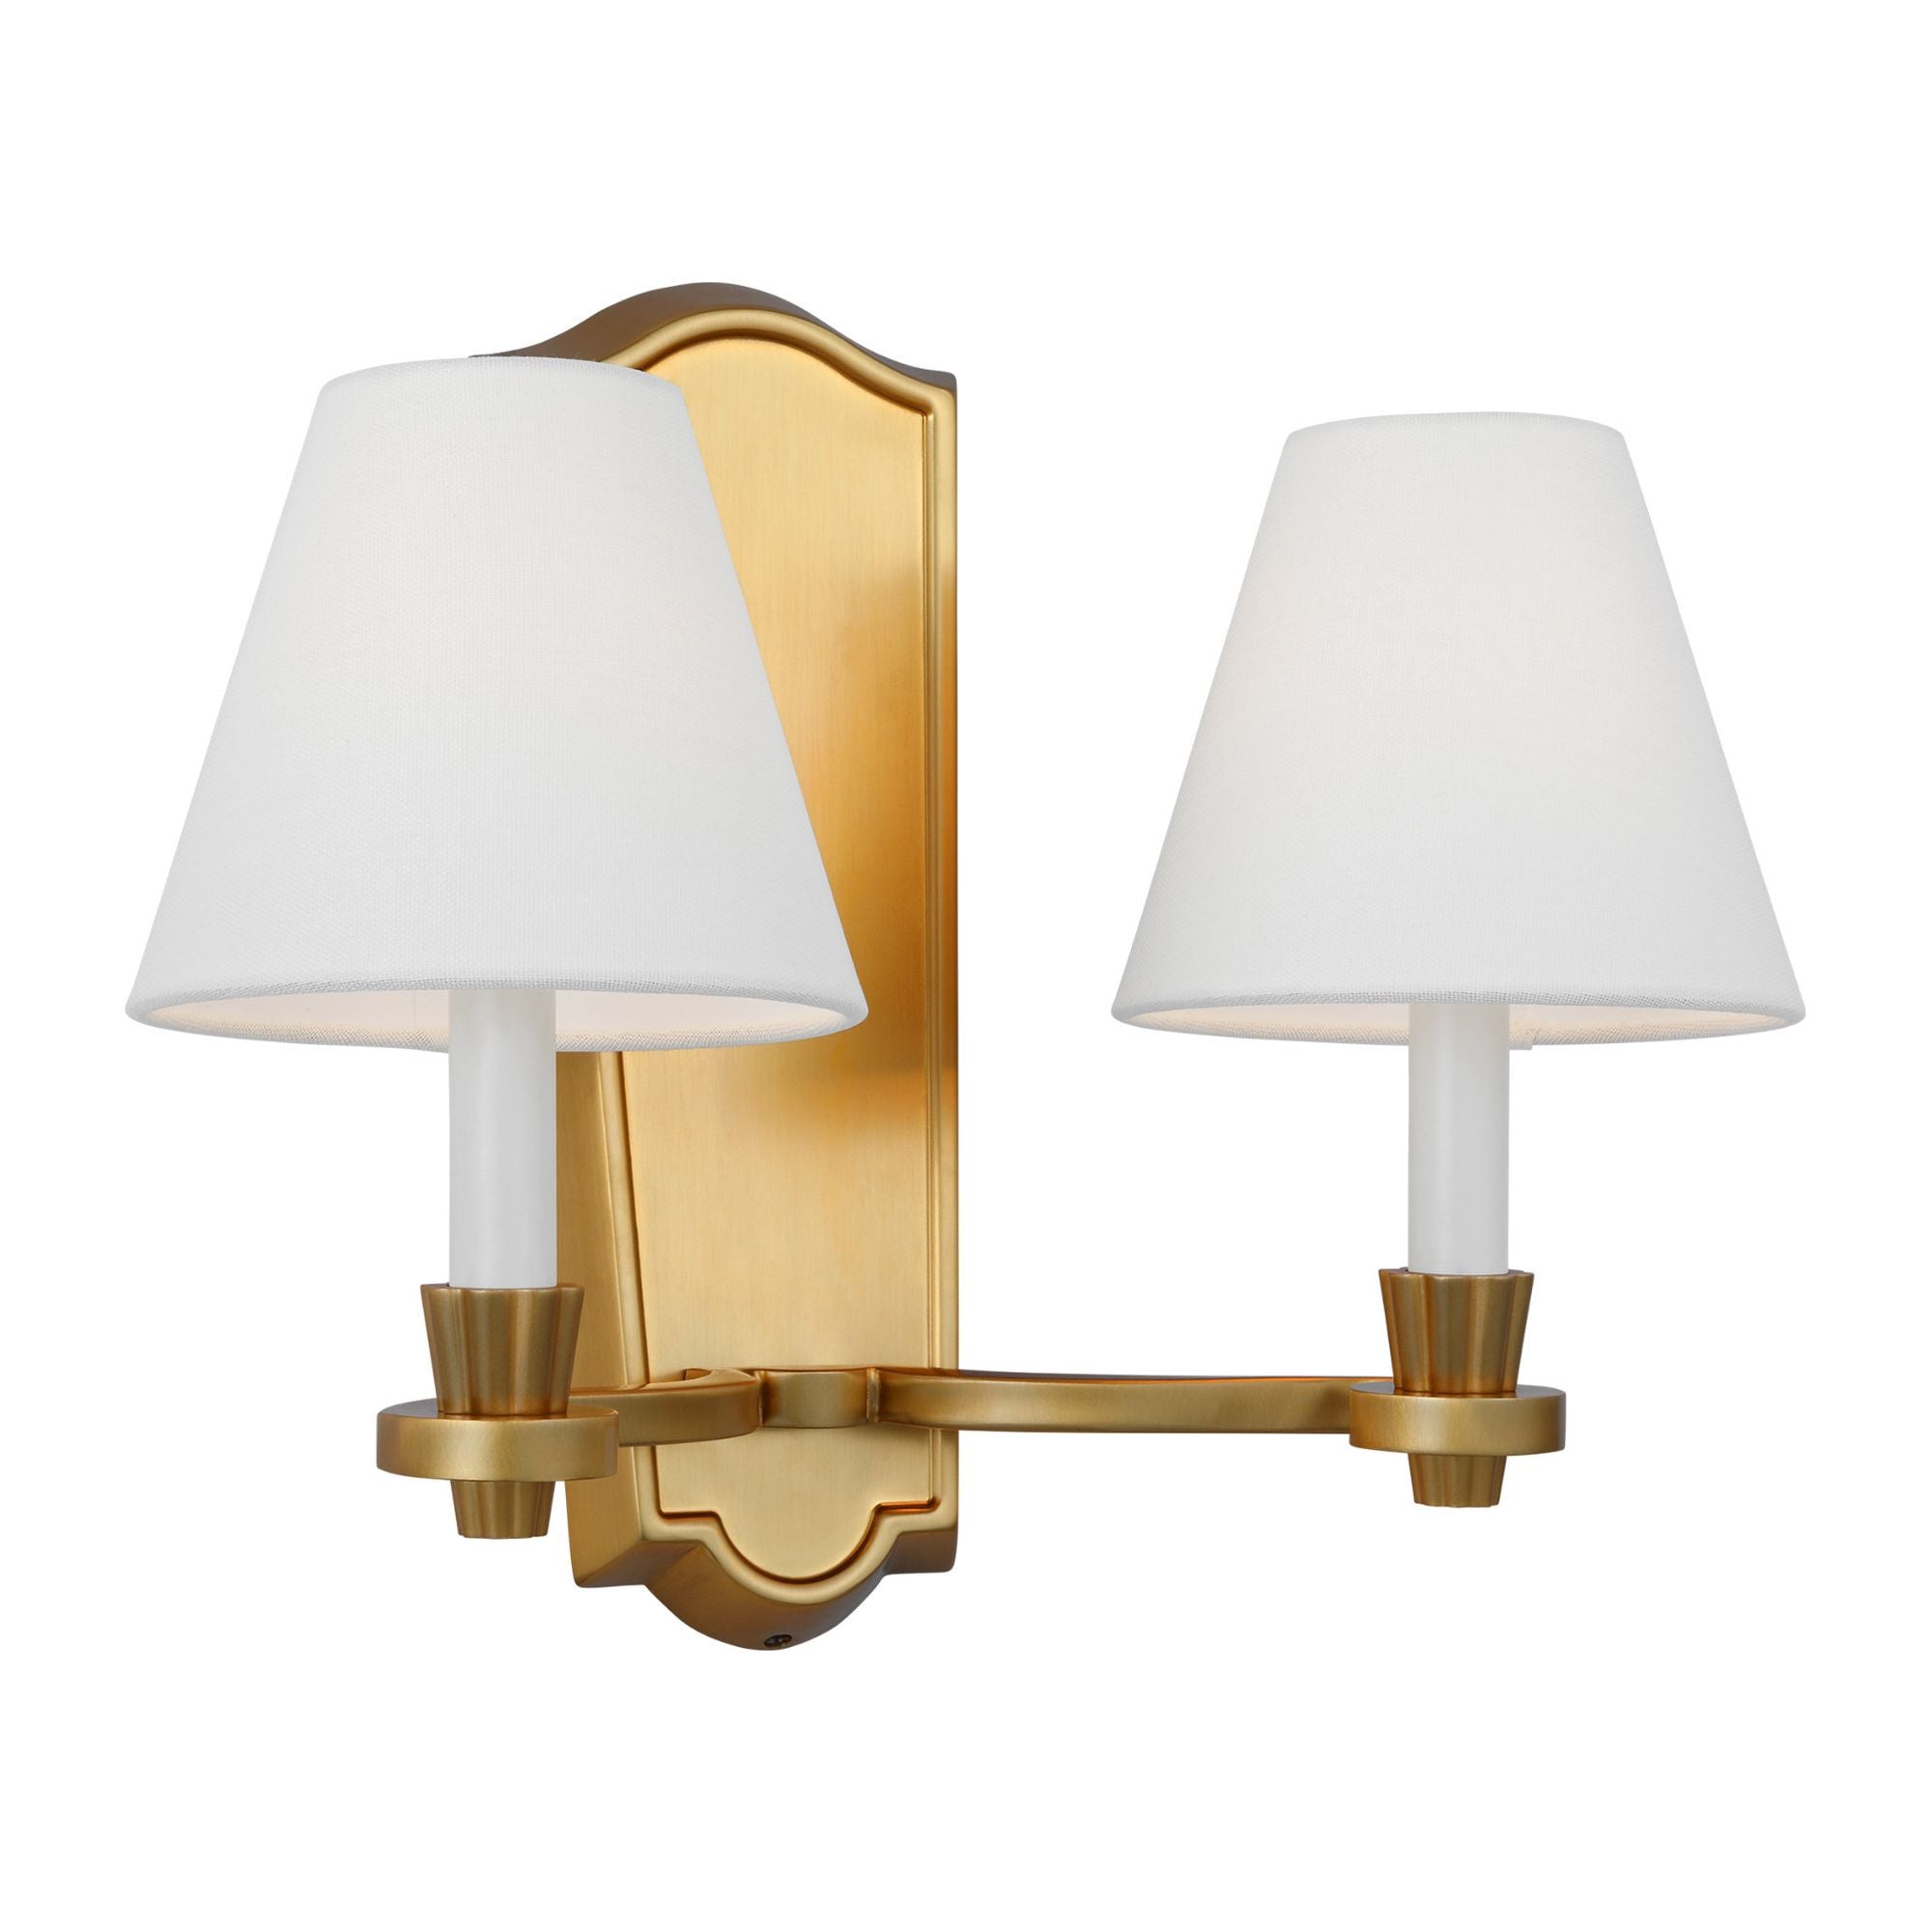 Alexa Hampton Paisley Double Sconce in Burnished Brass